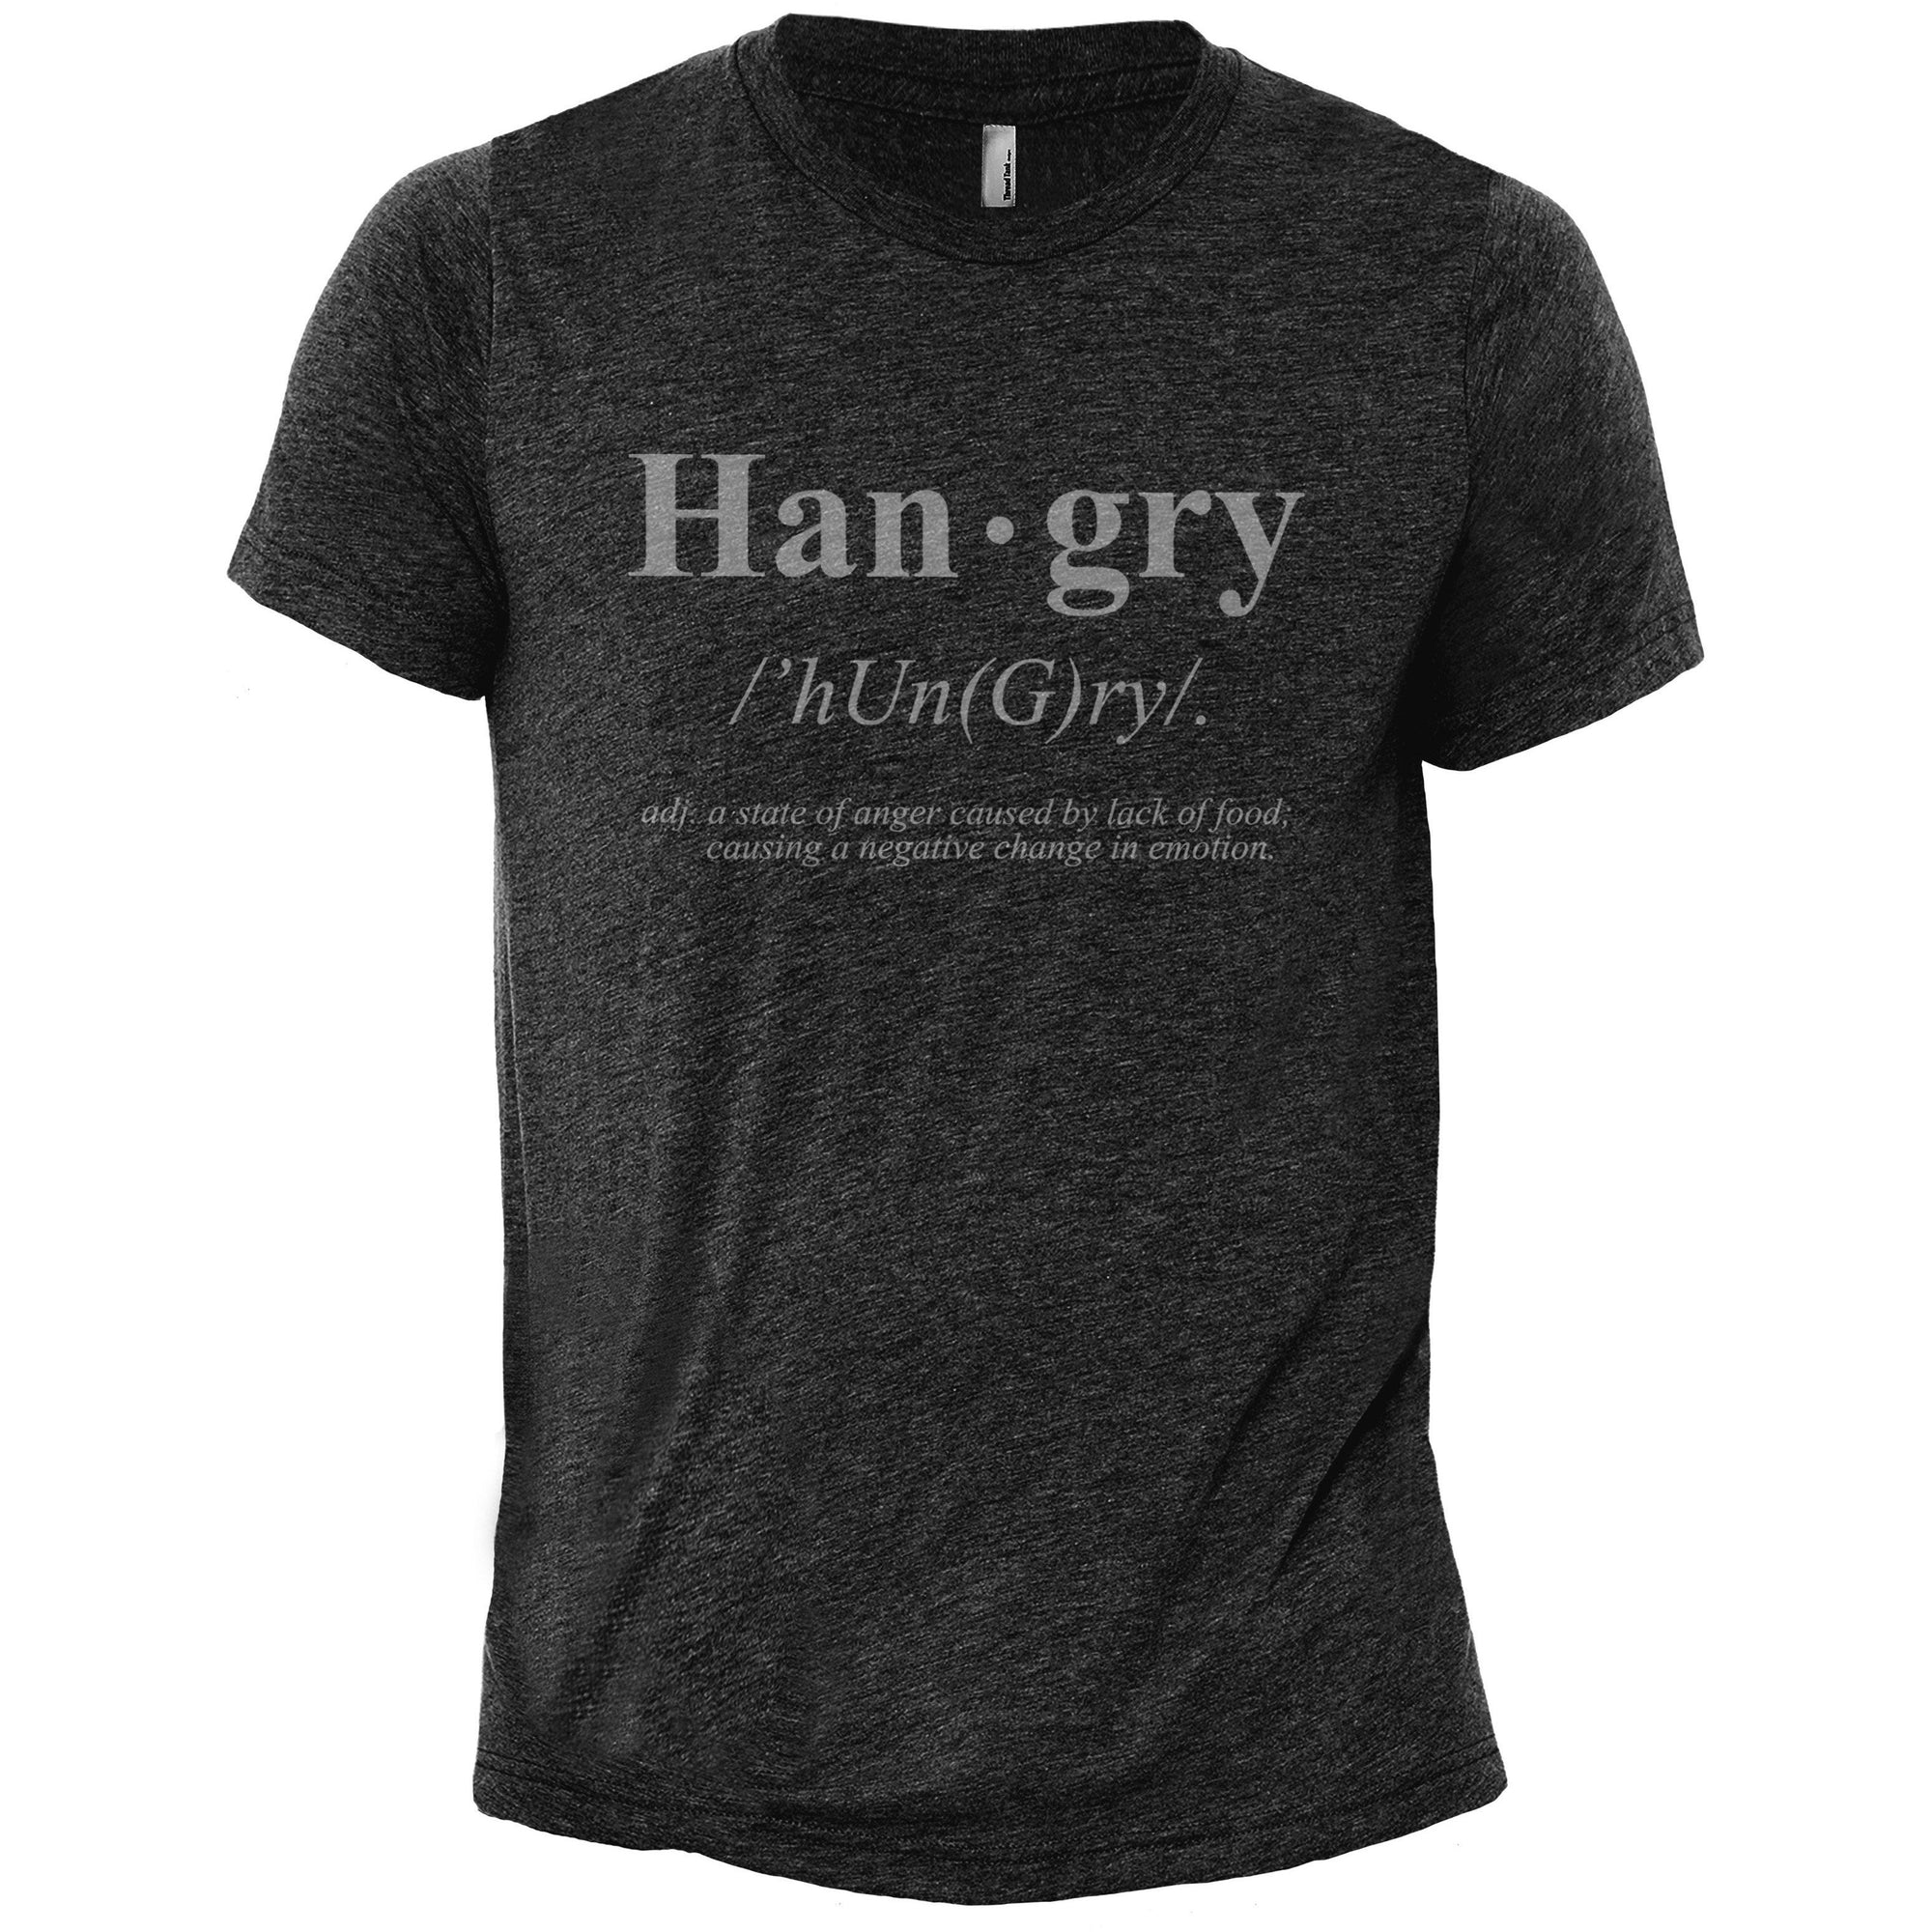 HanGry Charcoal Printed Graphic Men's Crew T-Shirt Tee